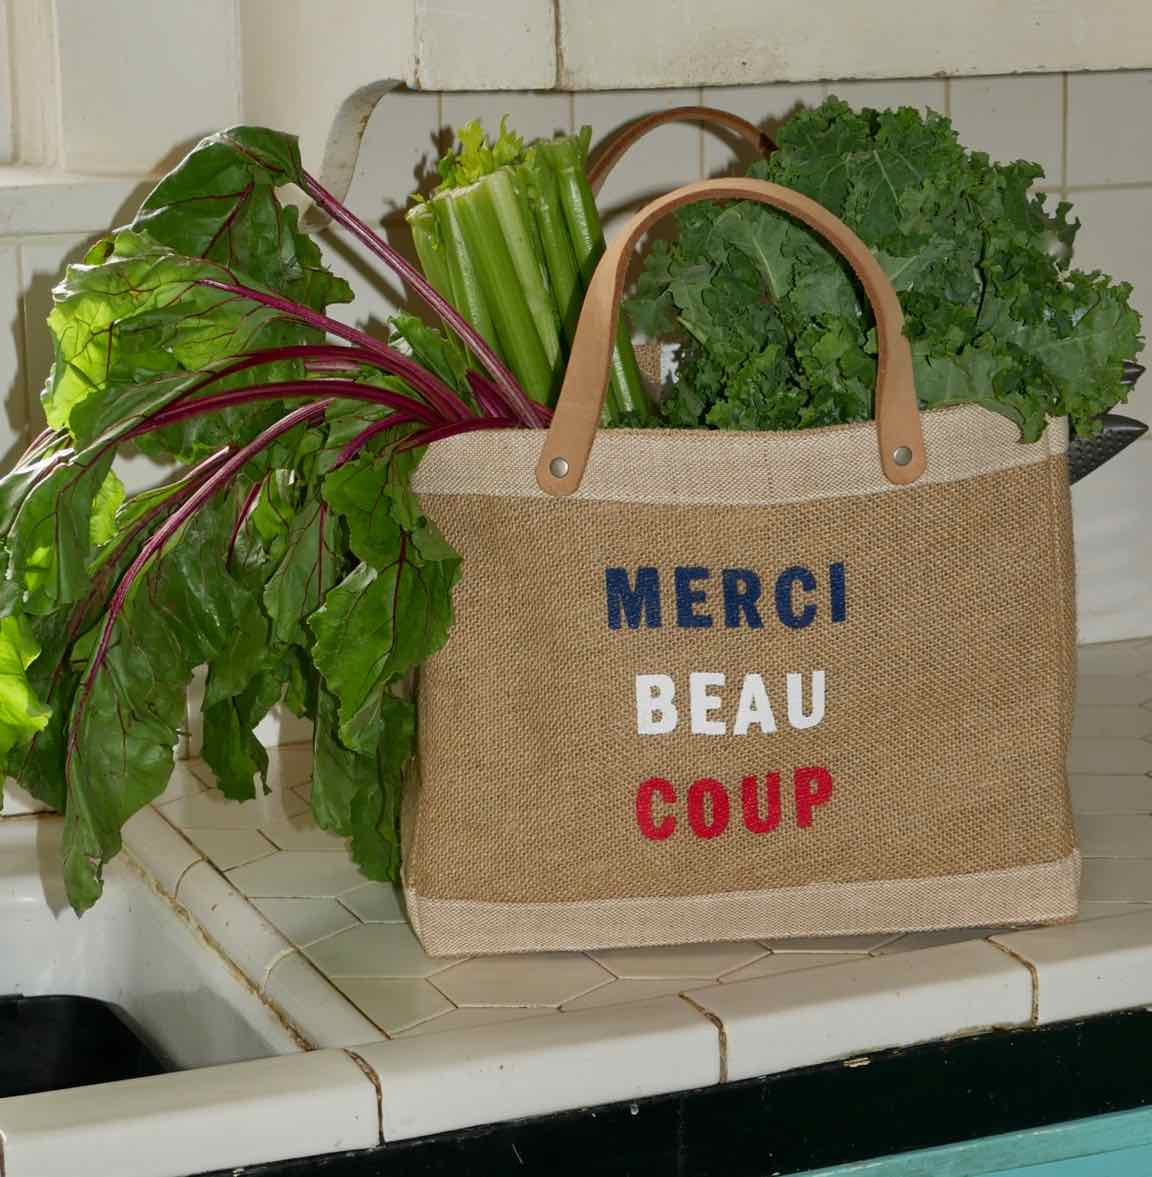 Apolis market bag with green leafy vegetables and message: Merci beaucoup